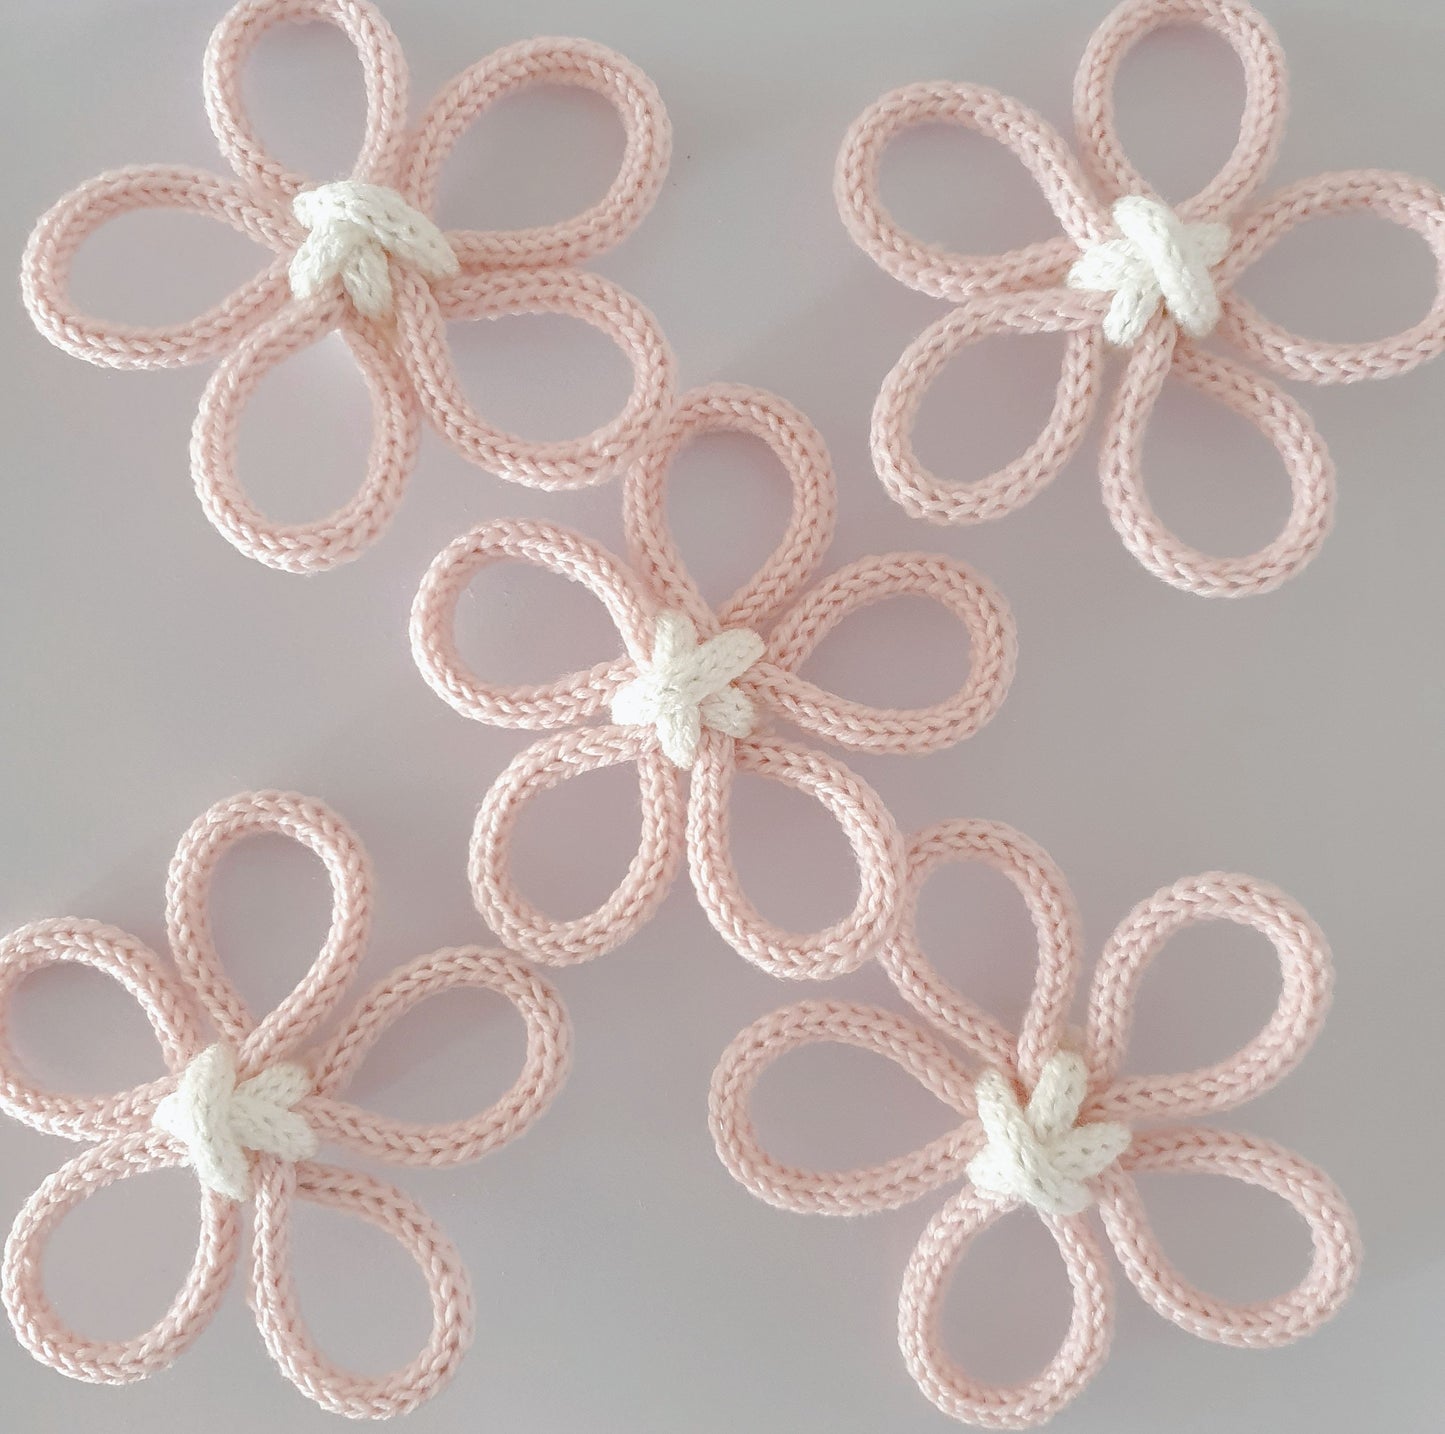 Knitted 2 Tone Flowers